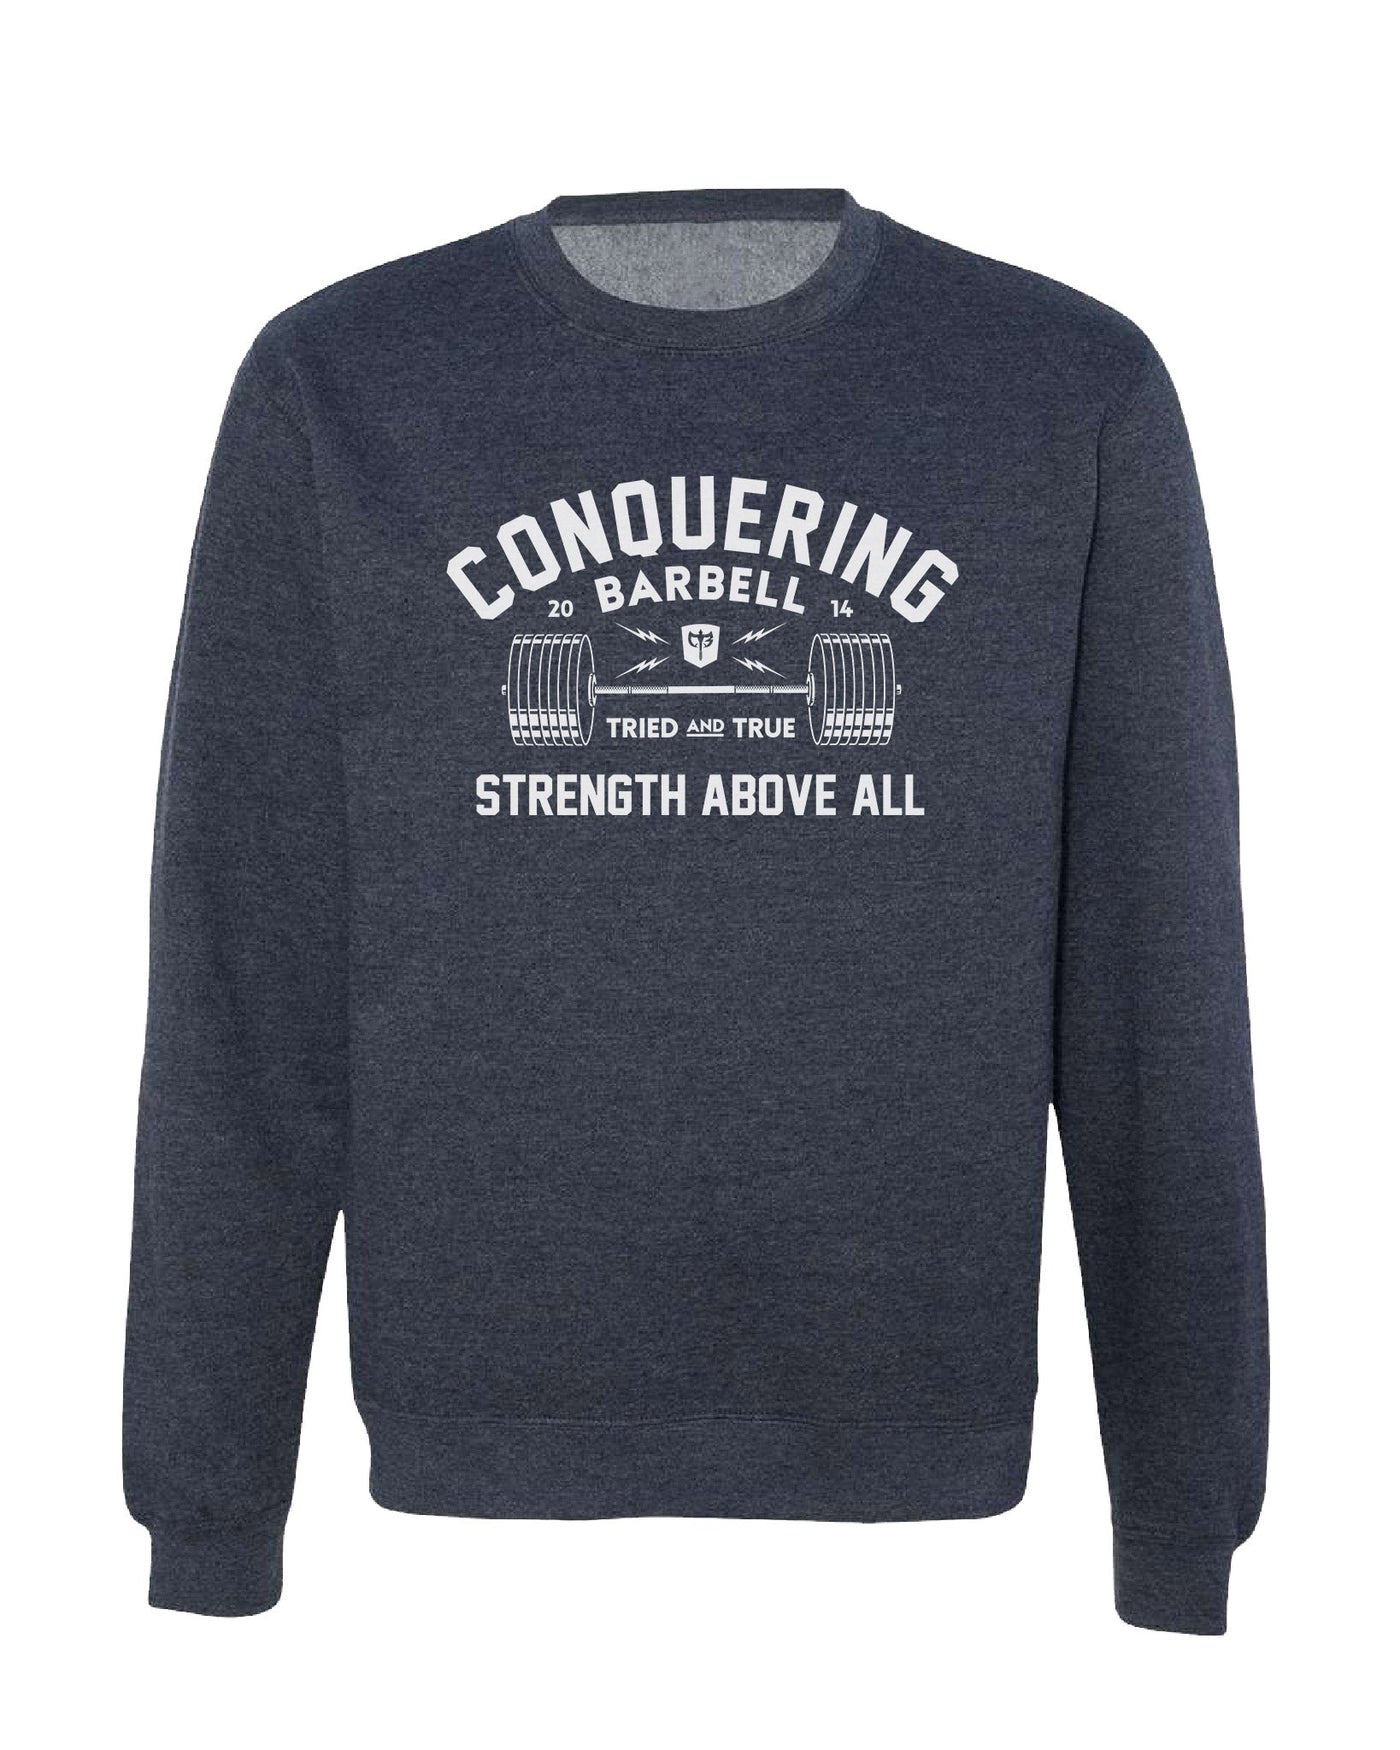 Strength Above All - Crewneck - Blue Steel - Conquering Barbell